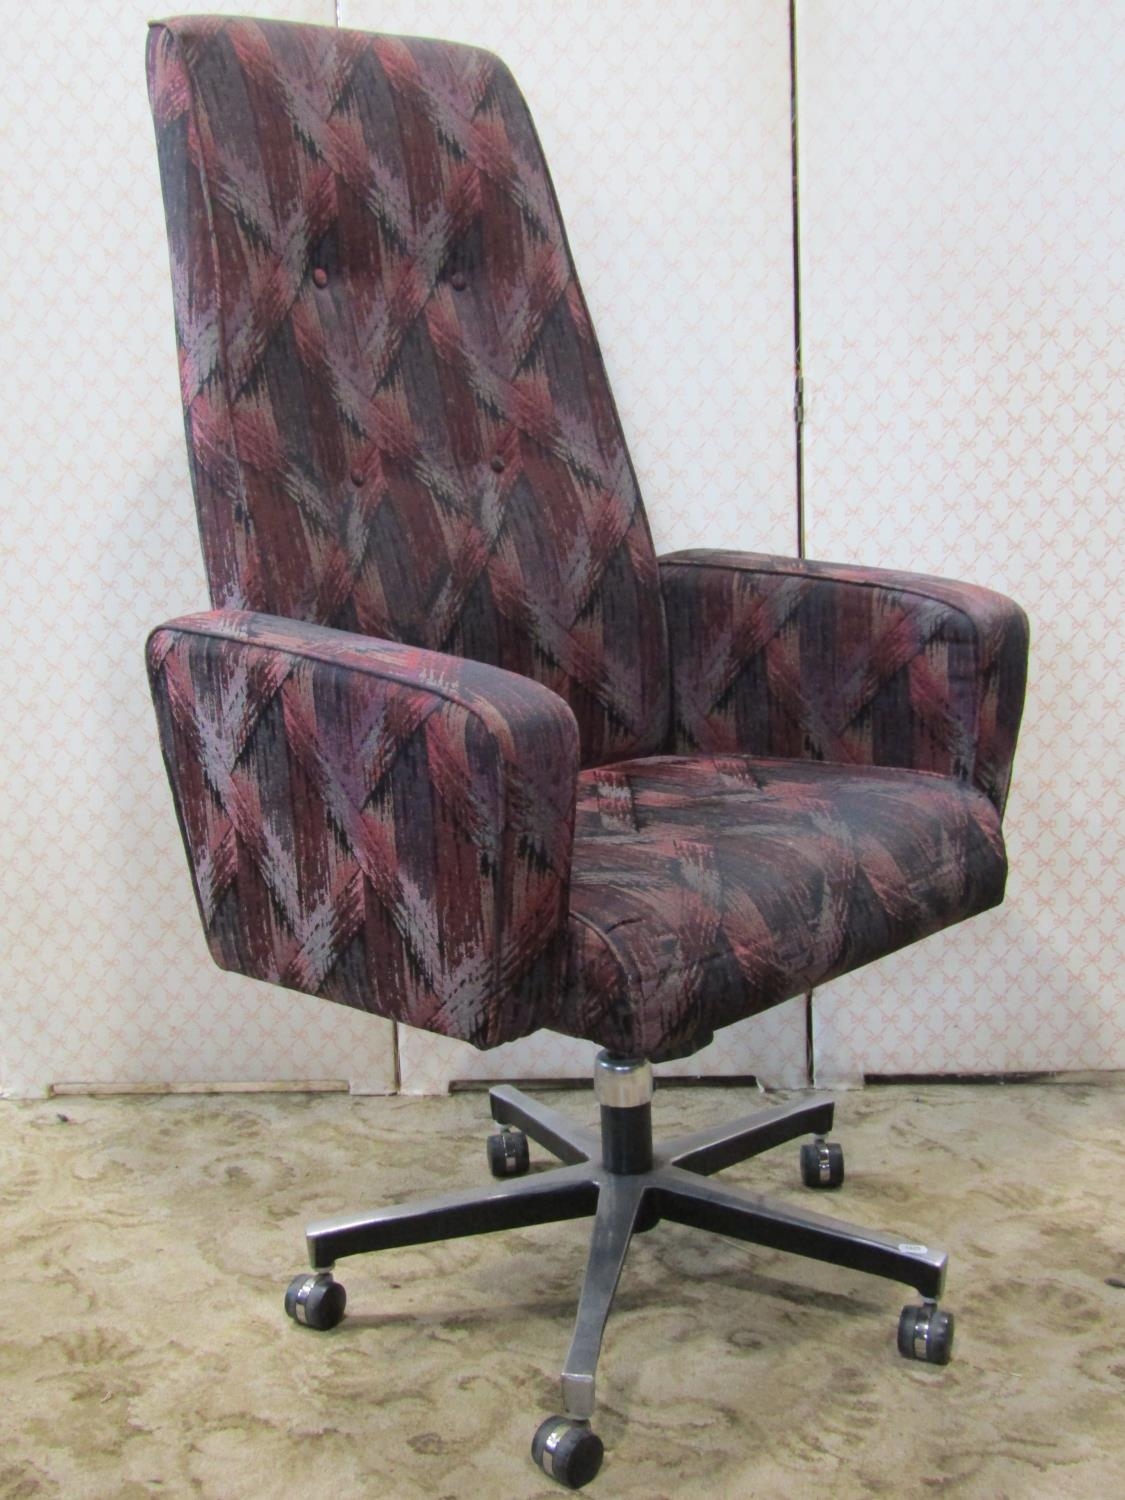 A Tansad swivel high back office desk chair with repeating colourful lattice pattern upholstery